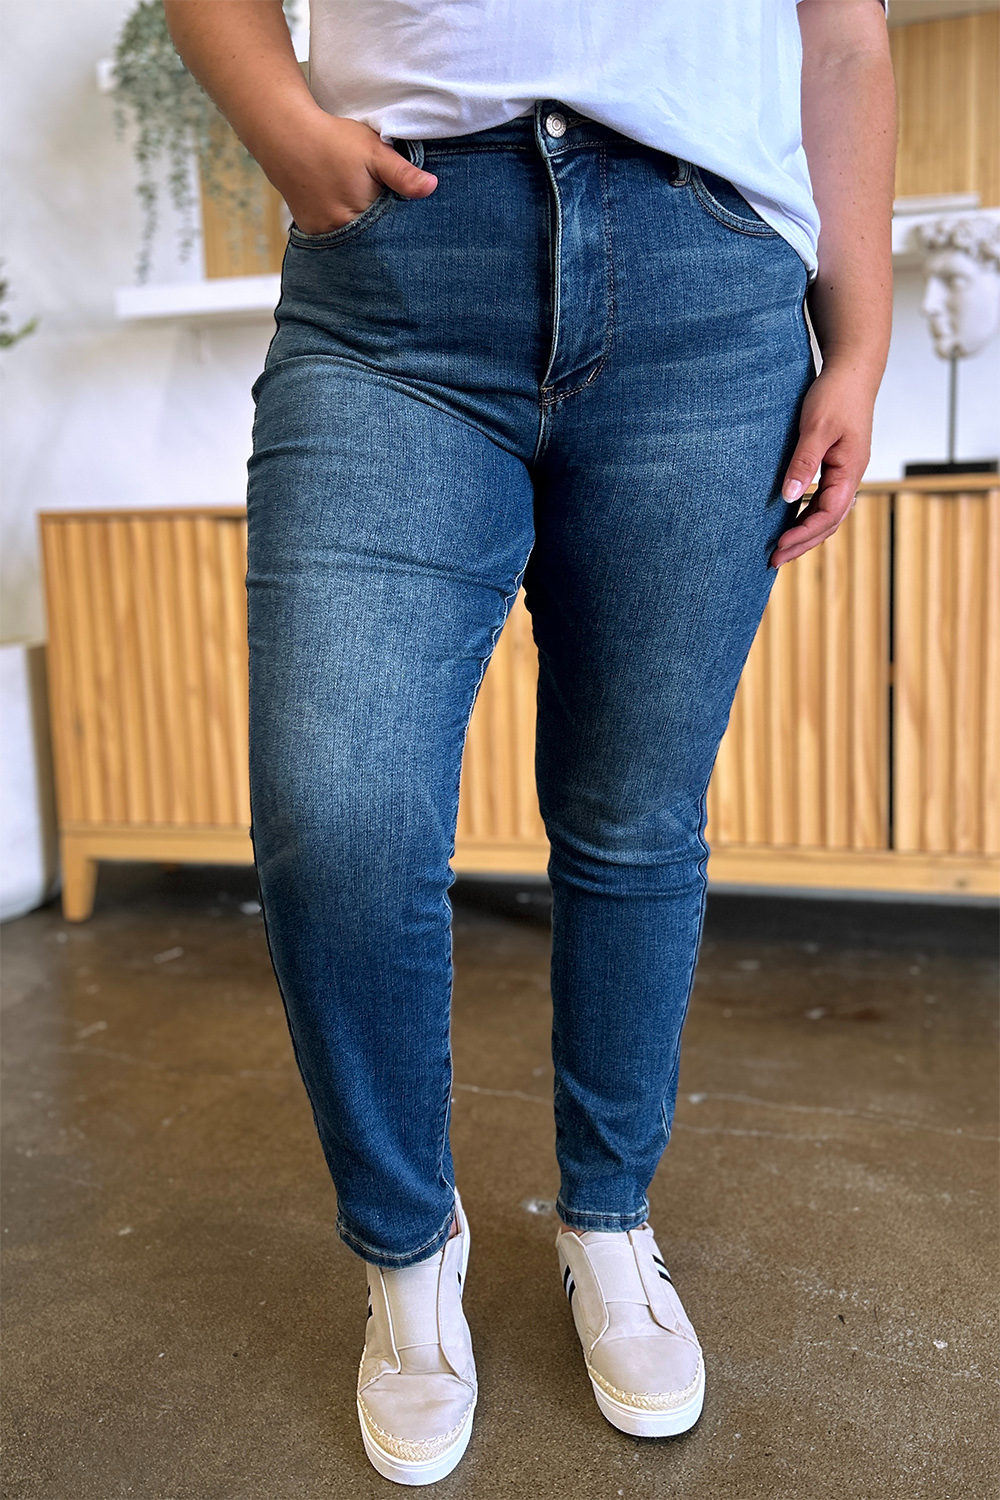 Shop Judy Blue Slim Jeans for unmatched style & comfort with tummy control, high-waist design, and inclusive sizing. Elevate your look now!